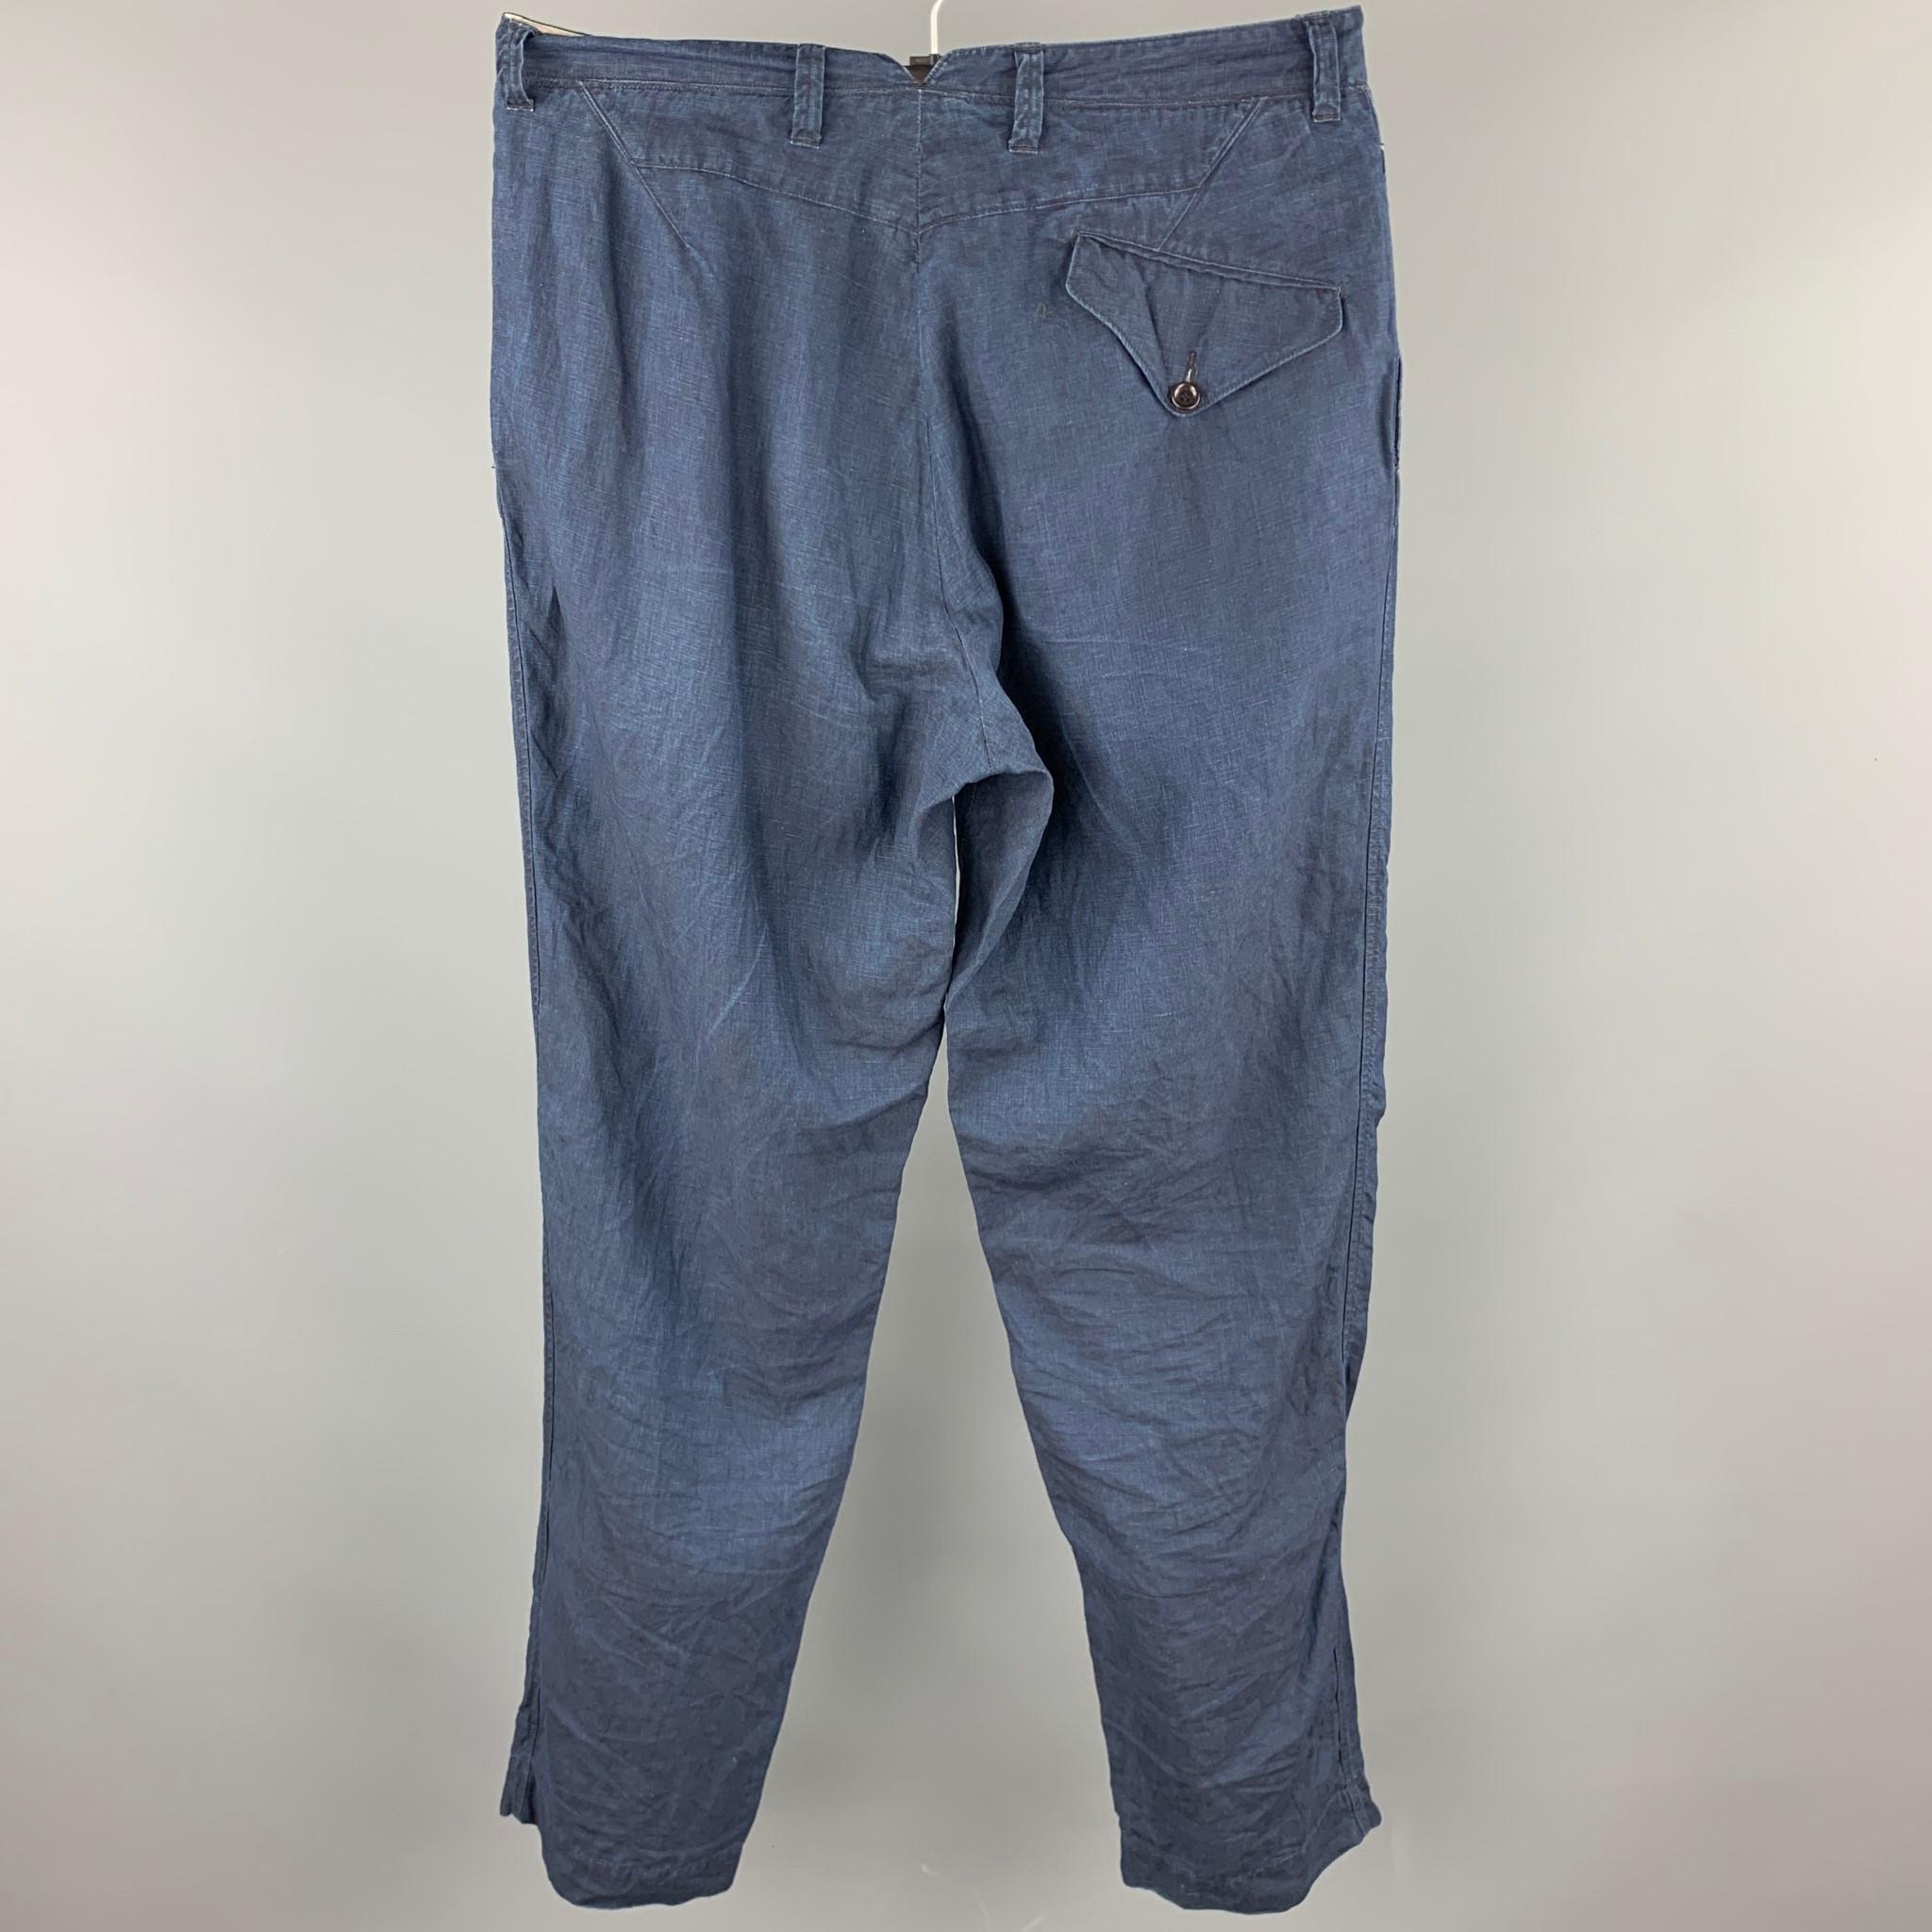 45RPM casual pants comes in a navy linen featuring a drop-crotch style, back pockets, and a zip fly closure. Made in Japan.

Very Good Pre-Owned Condition.
Marked: 34

Measurements:

Waist: 34 in. 
Rise: 11 in. 
Inseam: 34 in. 